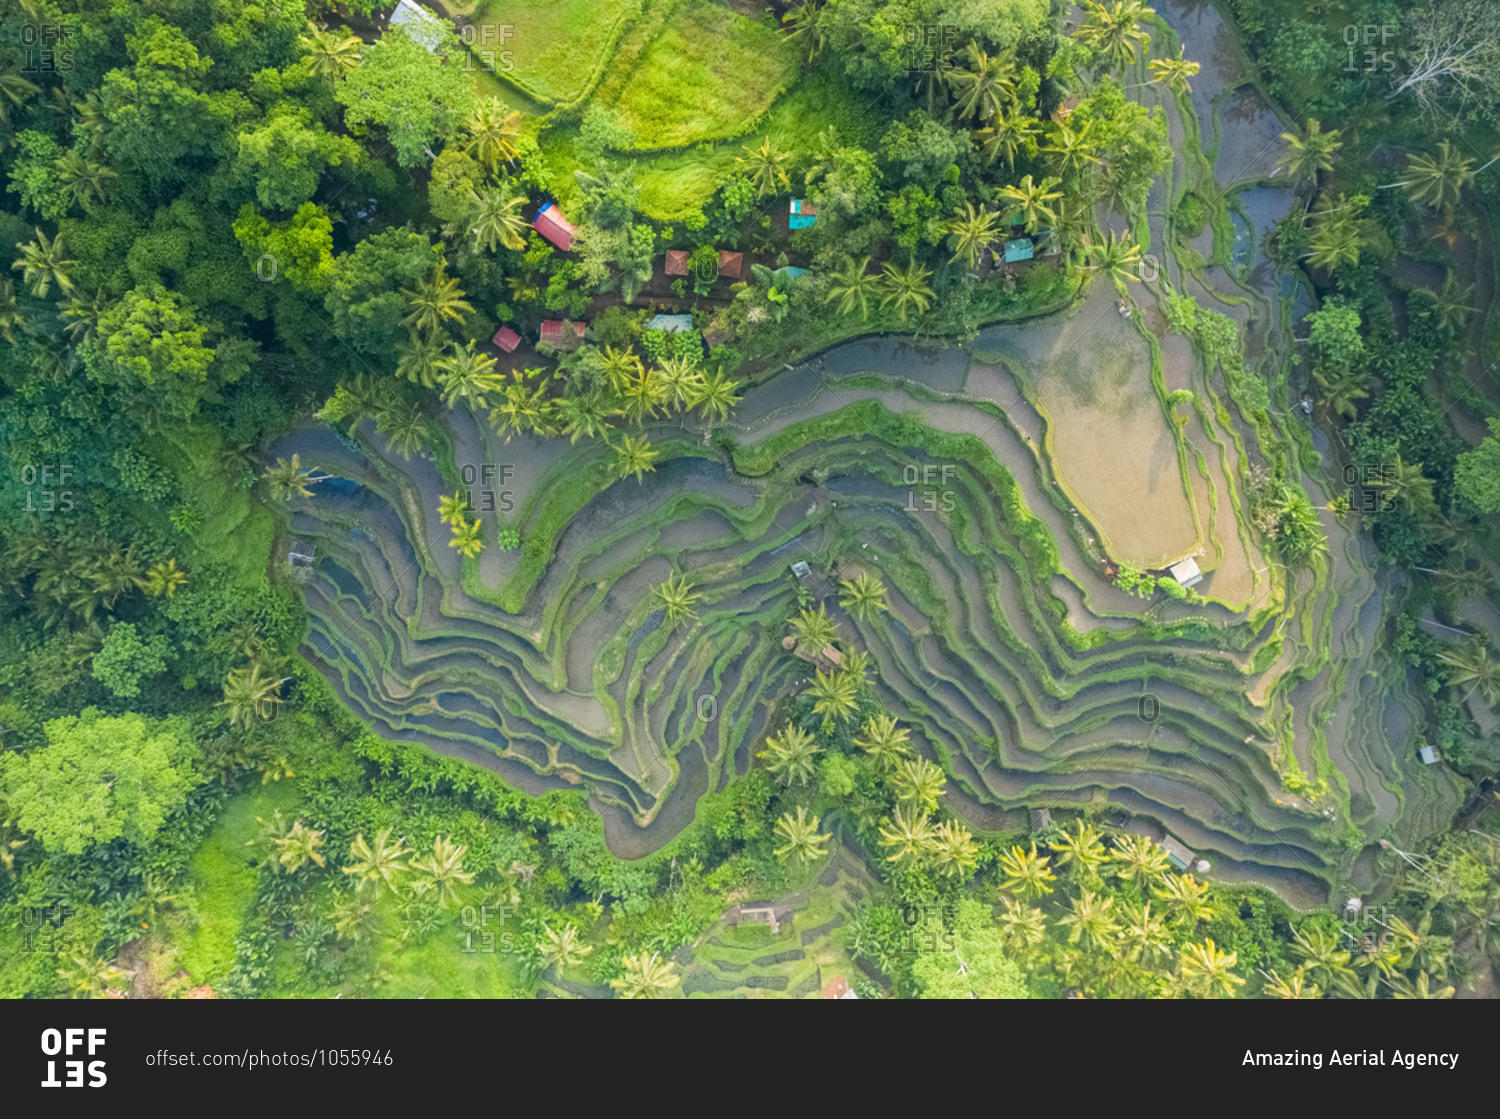 The Tegallalang Rice Terraces in Ubud are famous for their beautiful scenes of rice paddies and their innovative irrigation system. Known as the subak, the traditional Balinese cooperative irrigation system is said to have been passed down by a revered ho